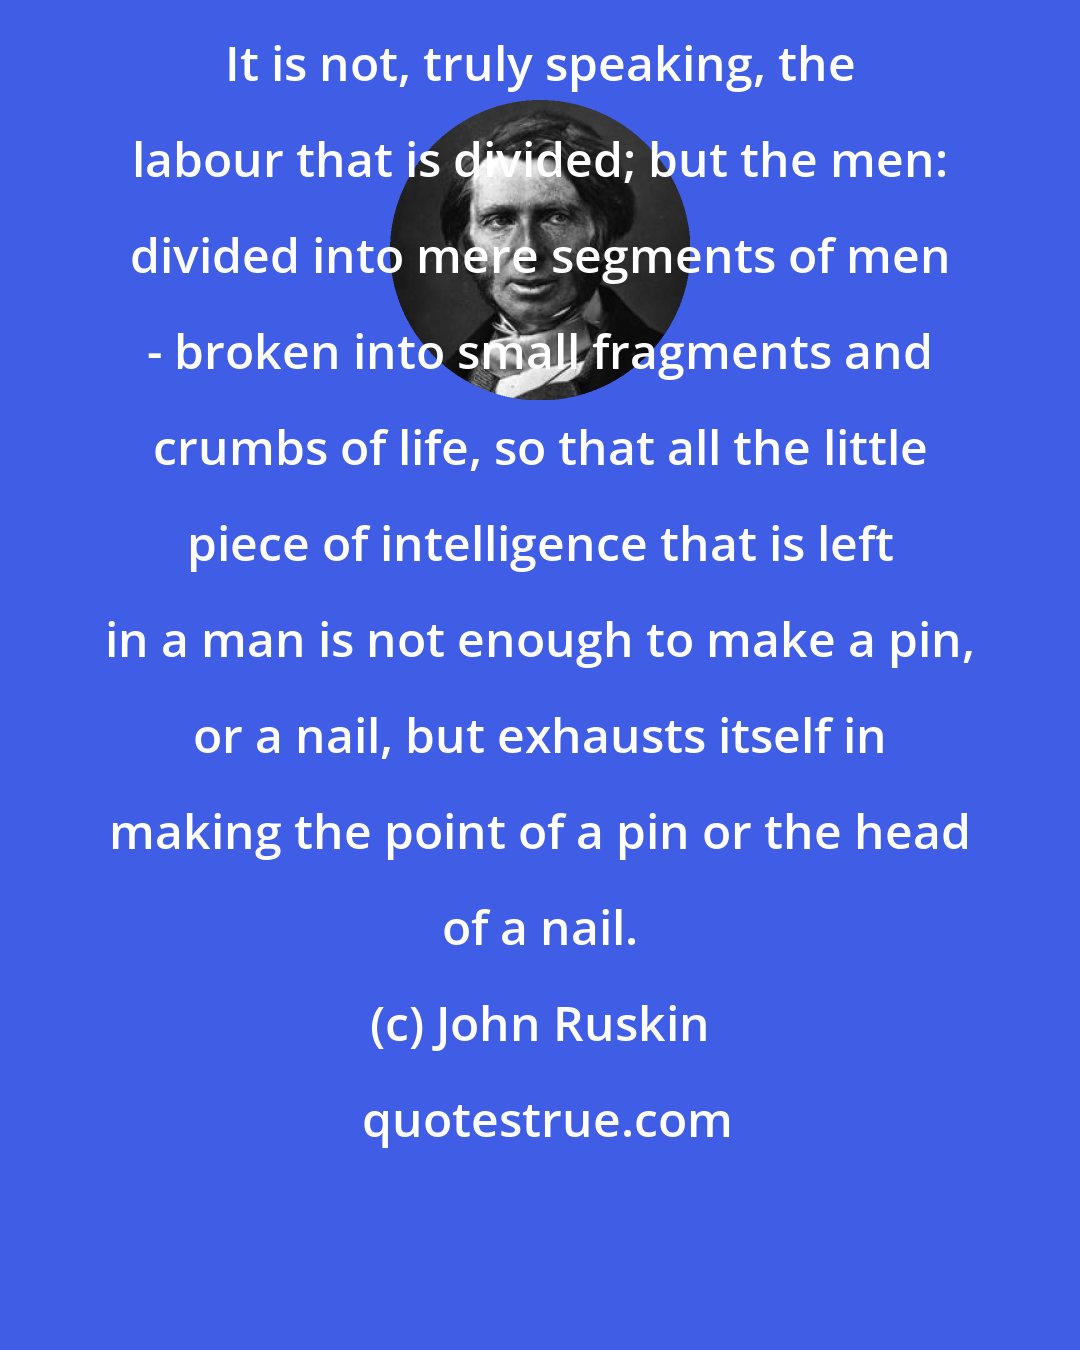 John Ruskin: It is not, truly speaking, the labour that is divided; but the men: divided into mere segments of men - broken into small fragments and crumbs of life, so that all the little piece of intelligence that is left in a man is not enough to make a pin, or a nail, but exhausts itself in making the point of a pin or the head of a nail.